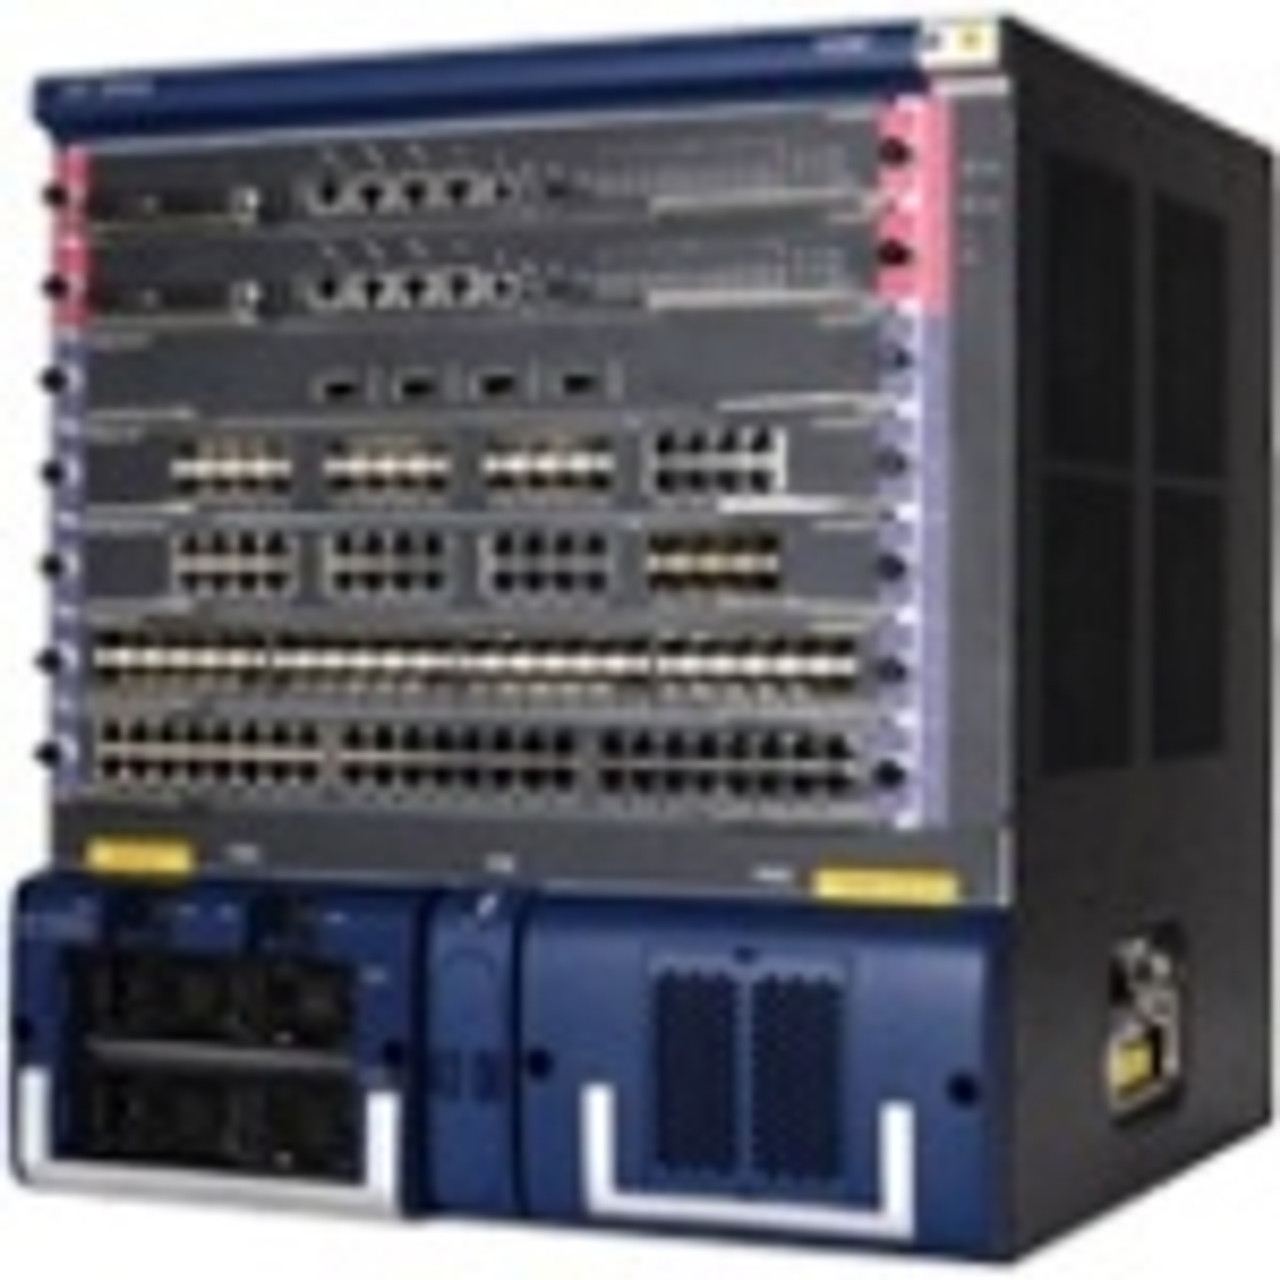 0235A38P H3C S9505E Switch Chassis Manageable 7 x Expansion Slots 3 Layer Supported 1 Year (Refurbished)